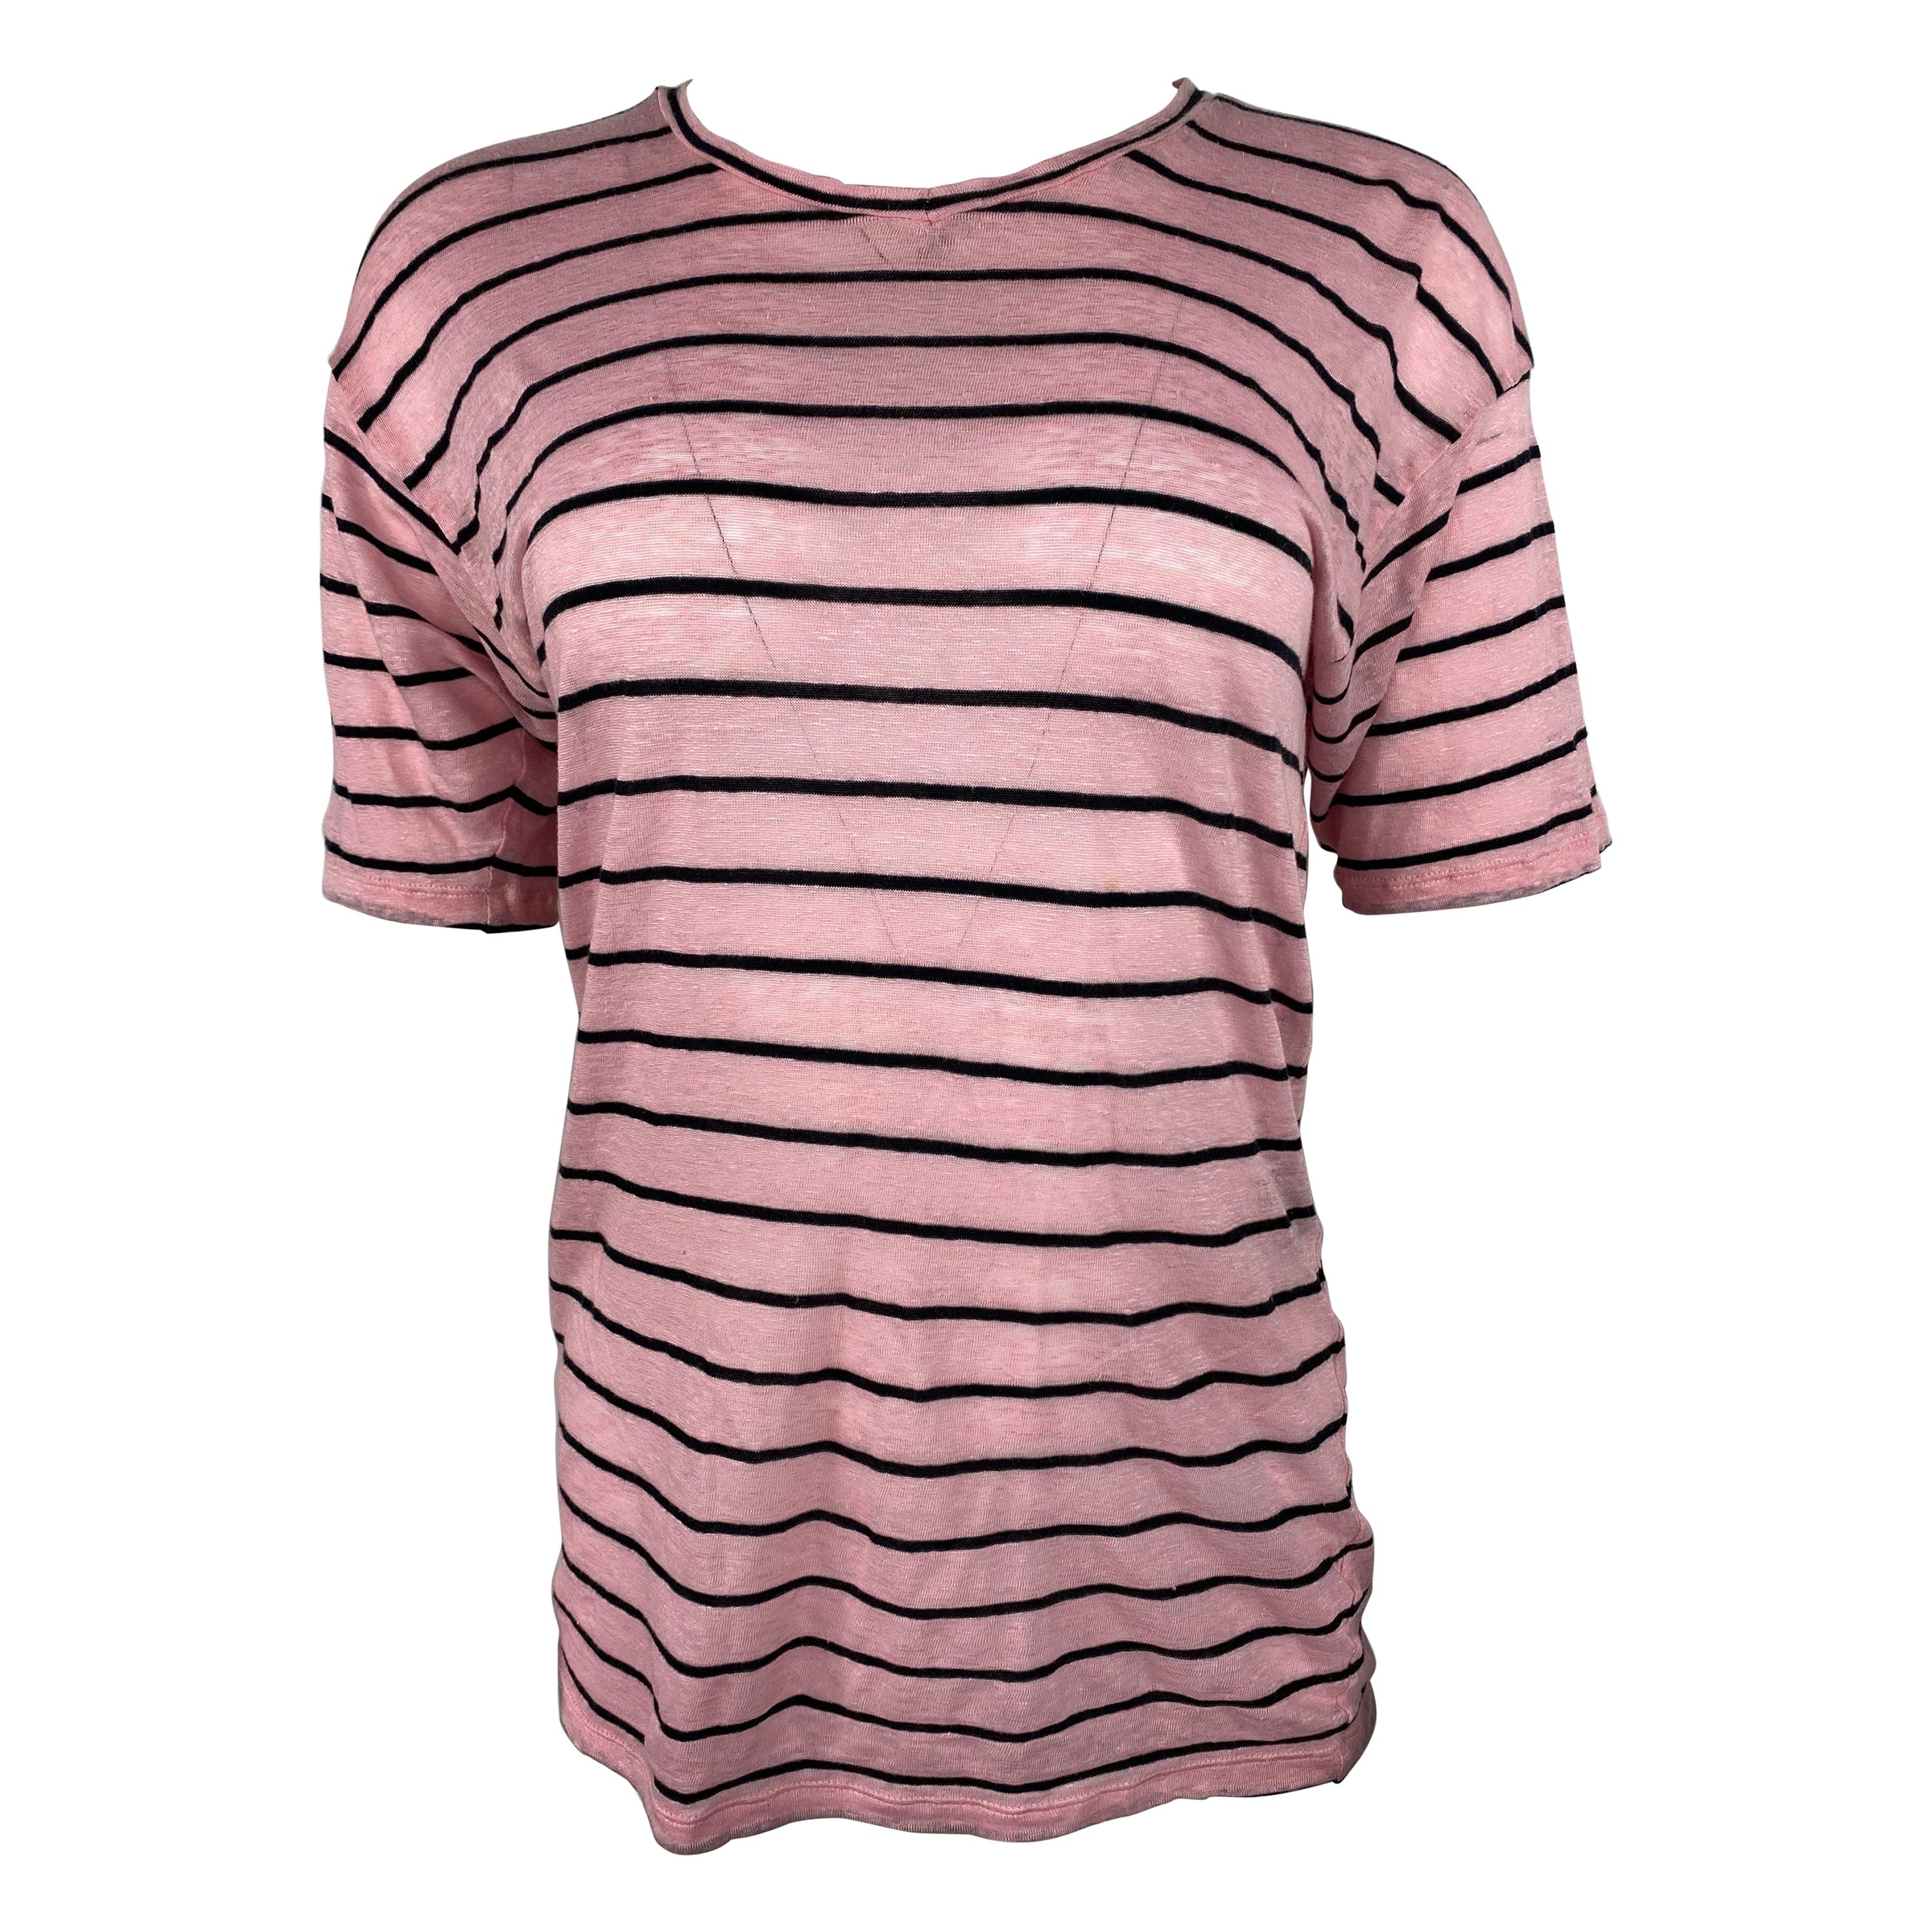 Isabel Marant Etoile Pink Striped T-Shirt, Size M For Sale